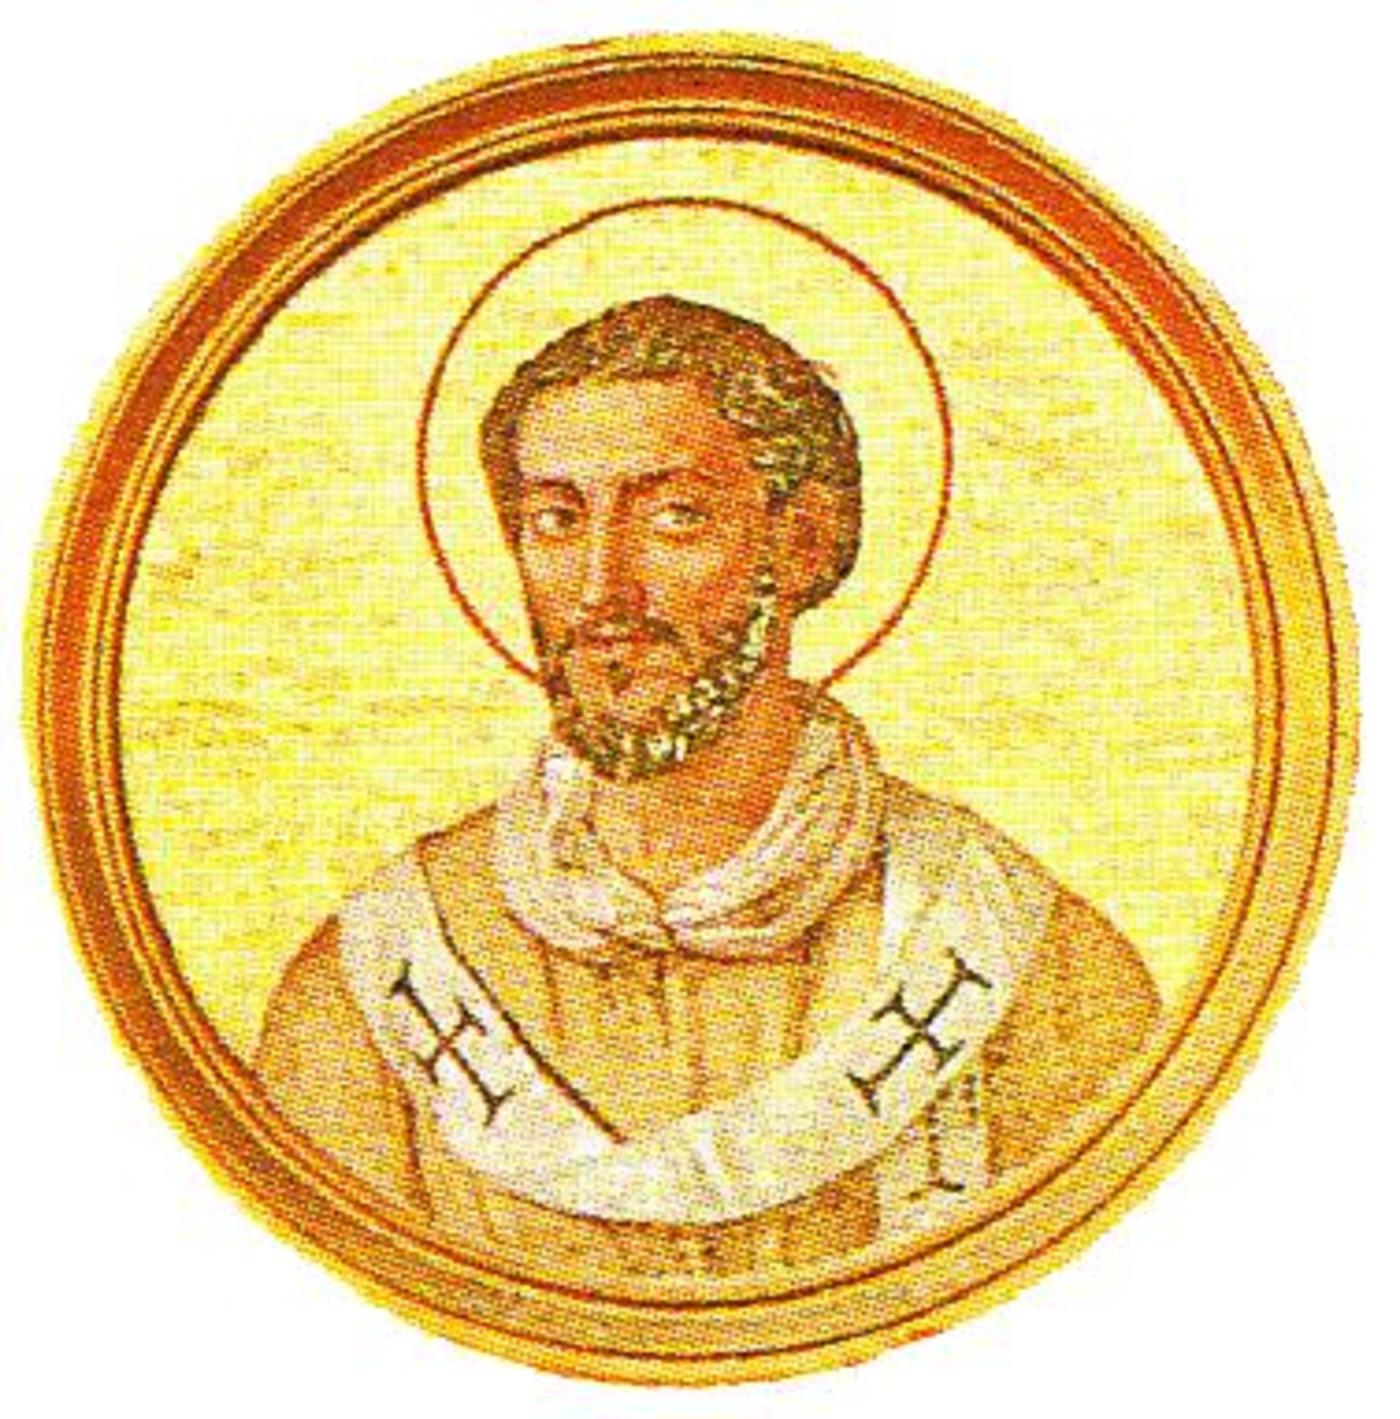 Saint of the day: Popes Caius and Soter